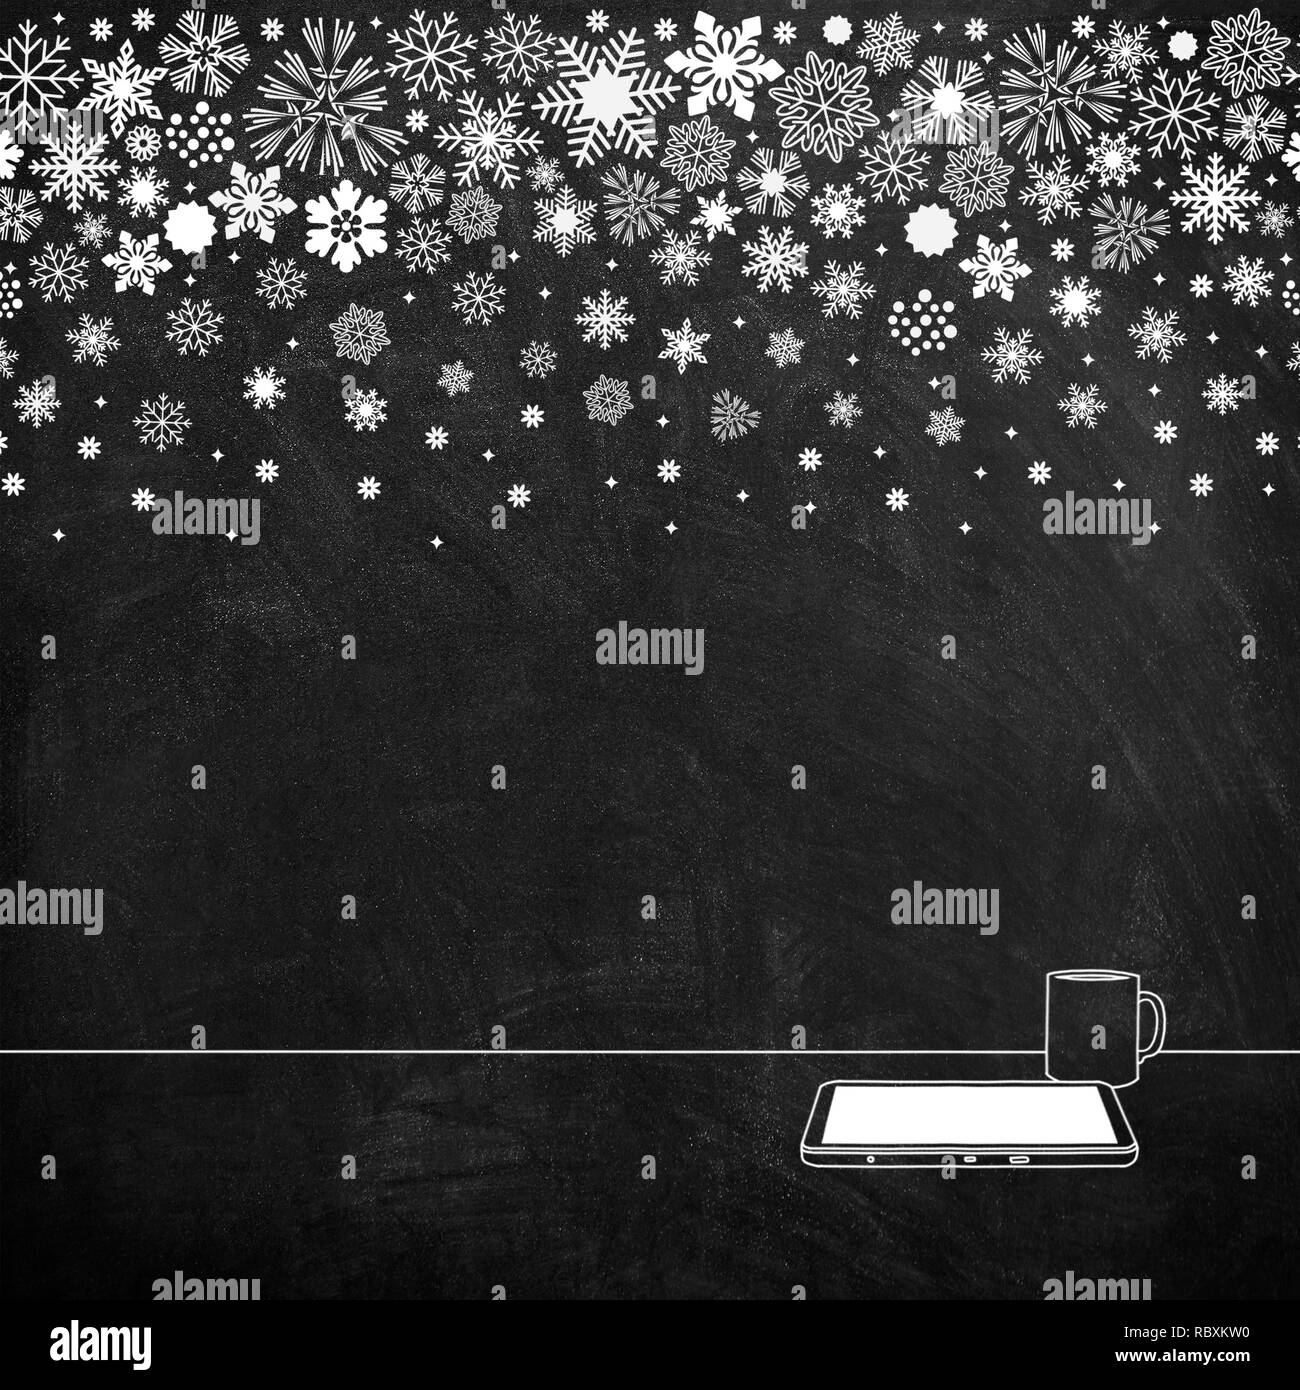 White chalk sketch drawing of snowflakes on blackboard background and tablet with mug Stock Photo